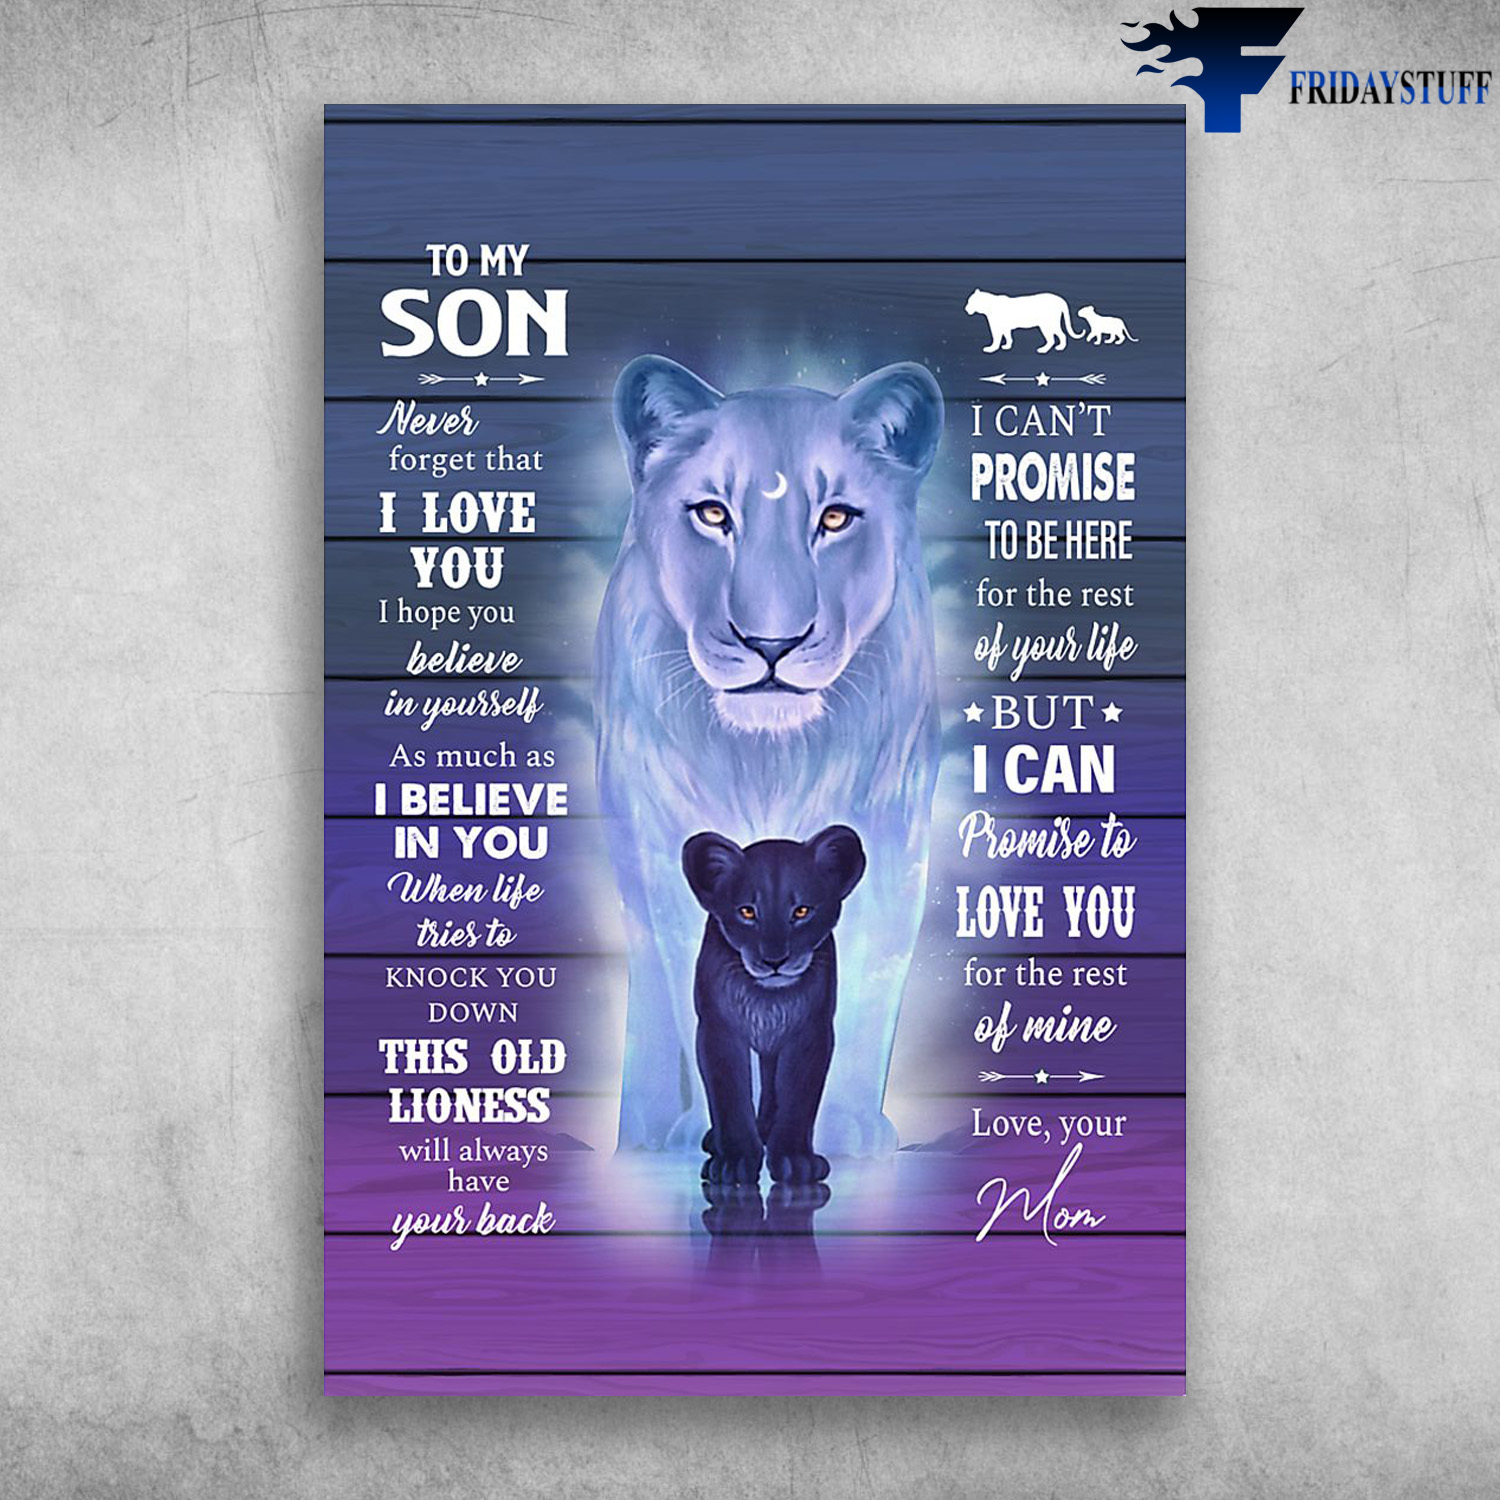 Lion Mon And Son - To My Son, Never Forget That, I Love You, I Hope You Believe In Yourself, As Much As I Believe In You, When Life Tries To Knock You Down, This Old Lioness Will Always Have Your Back, I Can't Promise To Be Here